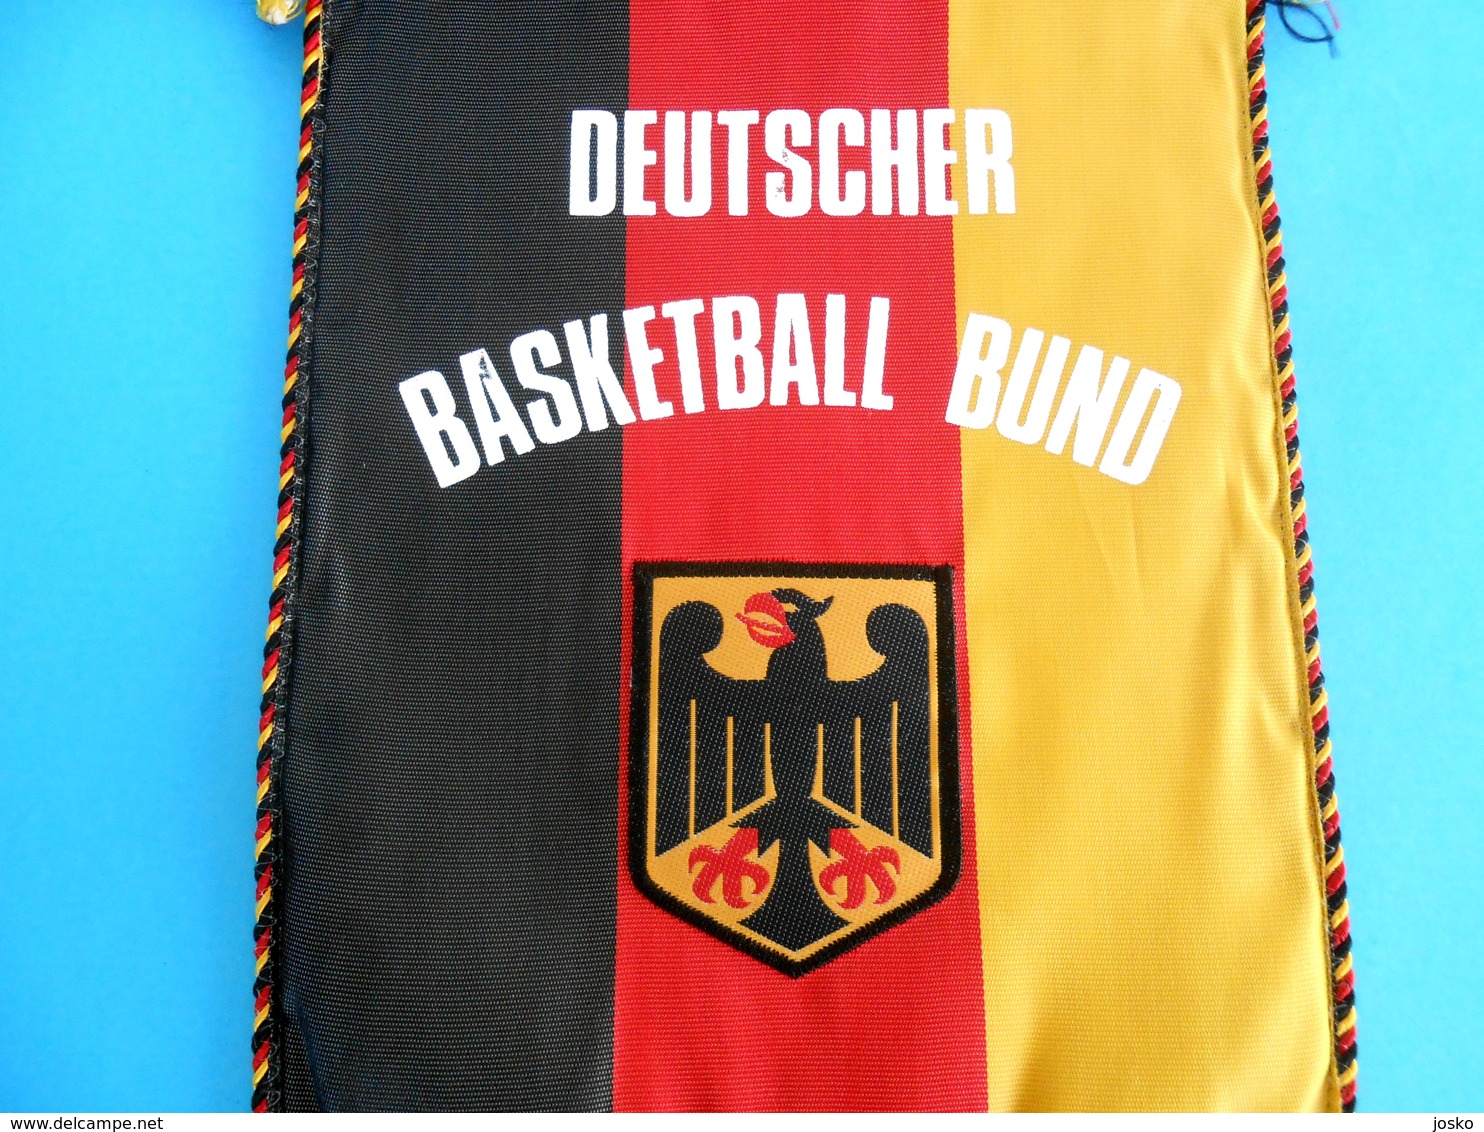 GERMANY BASKETBALL FEDERATION - Large Official Match Worn Pennant * Basket-ball Baloncesto Pallacanestro Association - Apparel, Souvenirs & Other